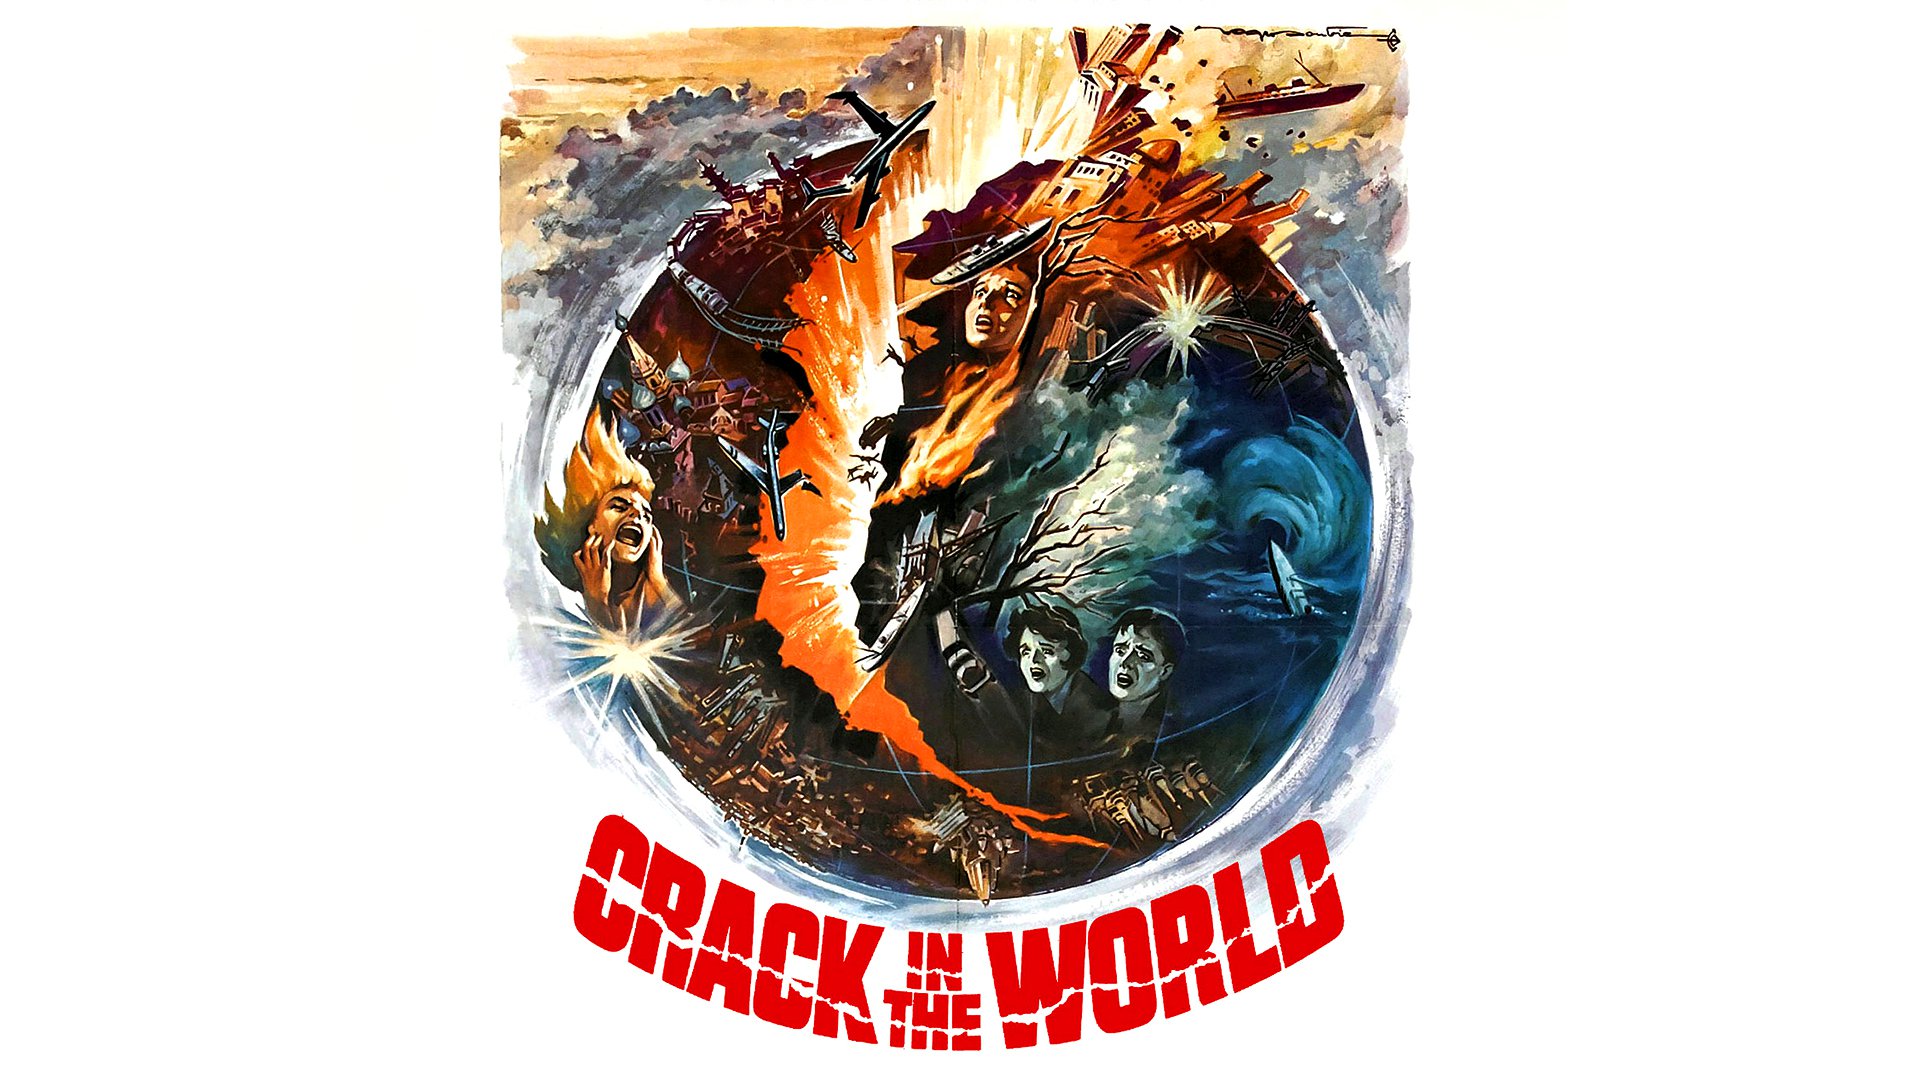 Crack in the World